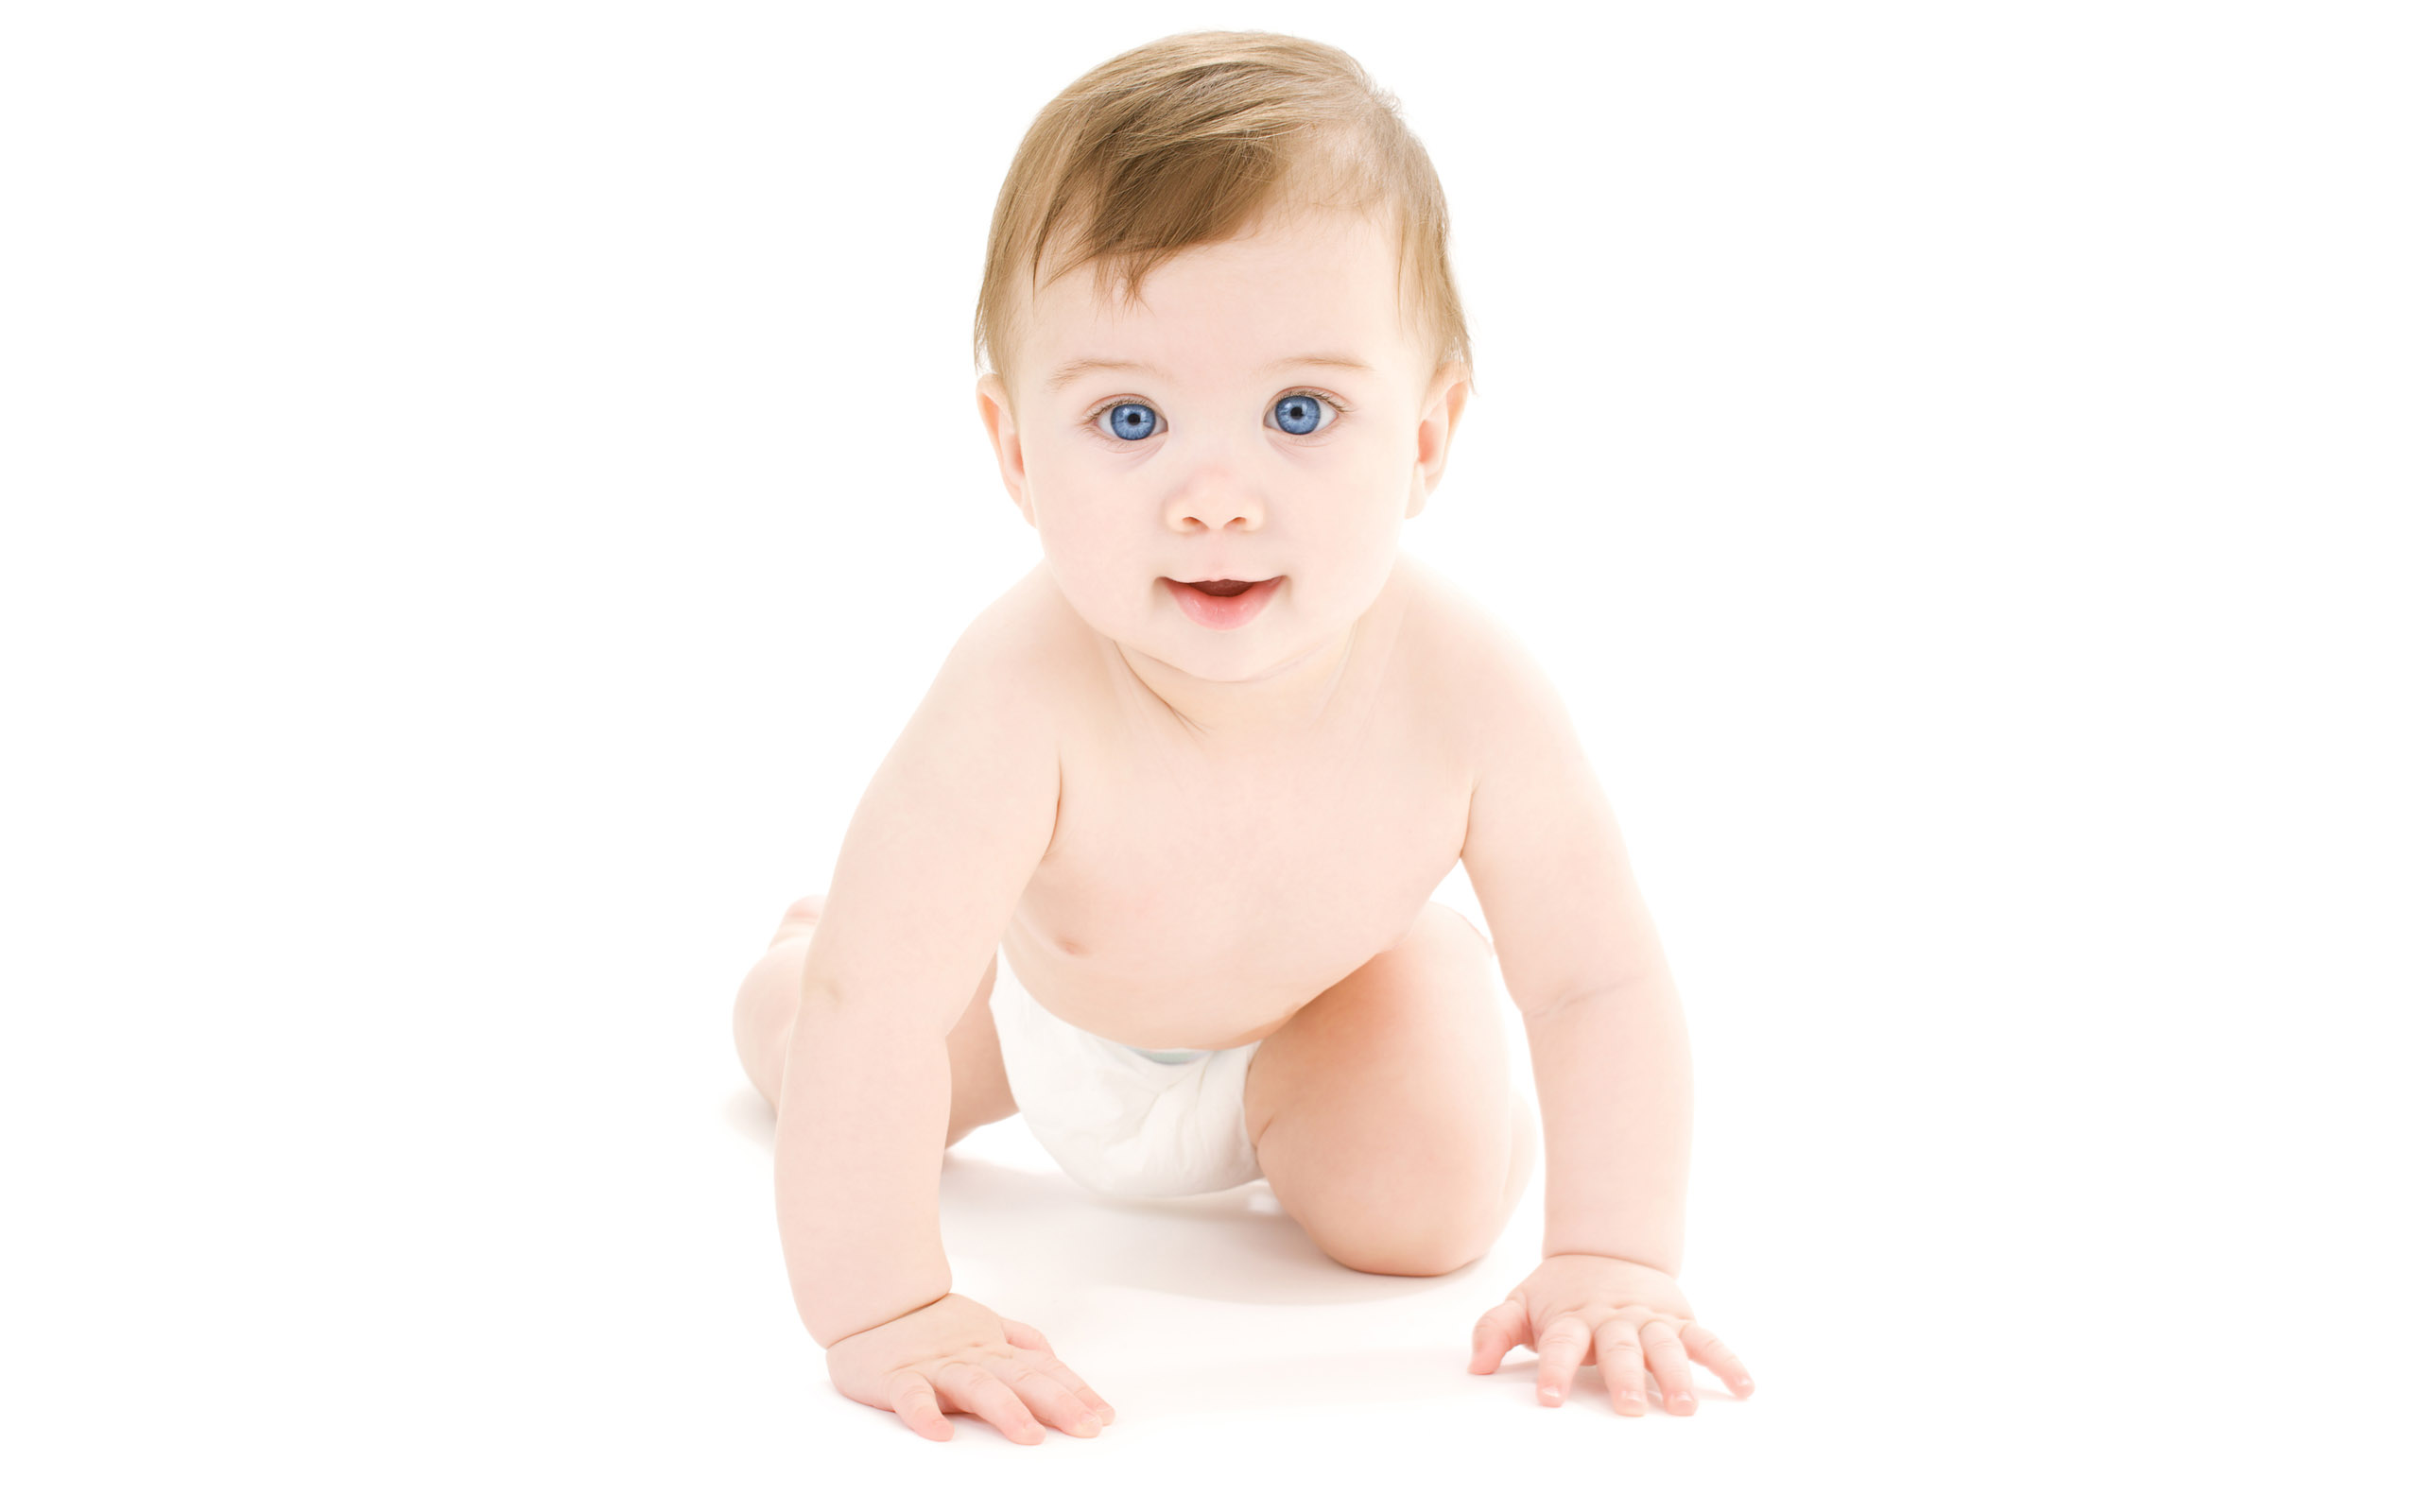 Lovely Baby Background Wallpaper High Definition High Quality